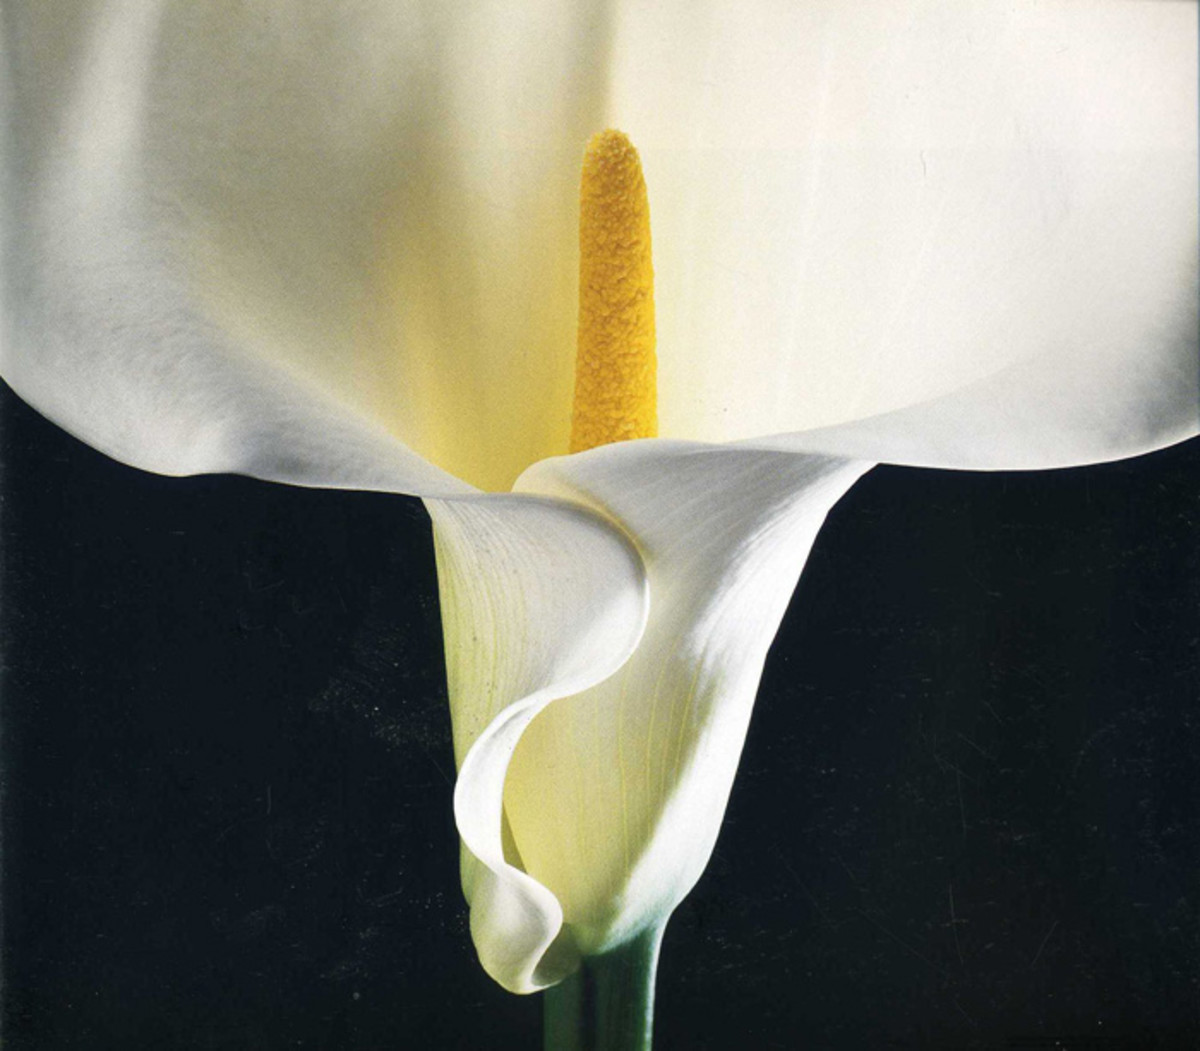 robert-mapplethorpe-influential-and-contraversial-20th-century-photographer-artist